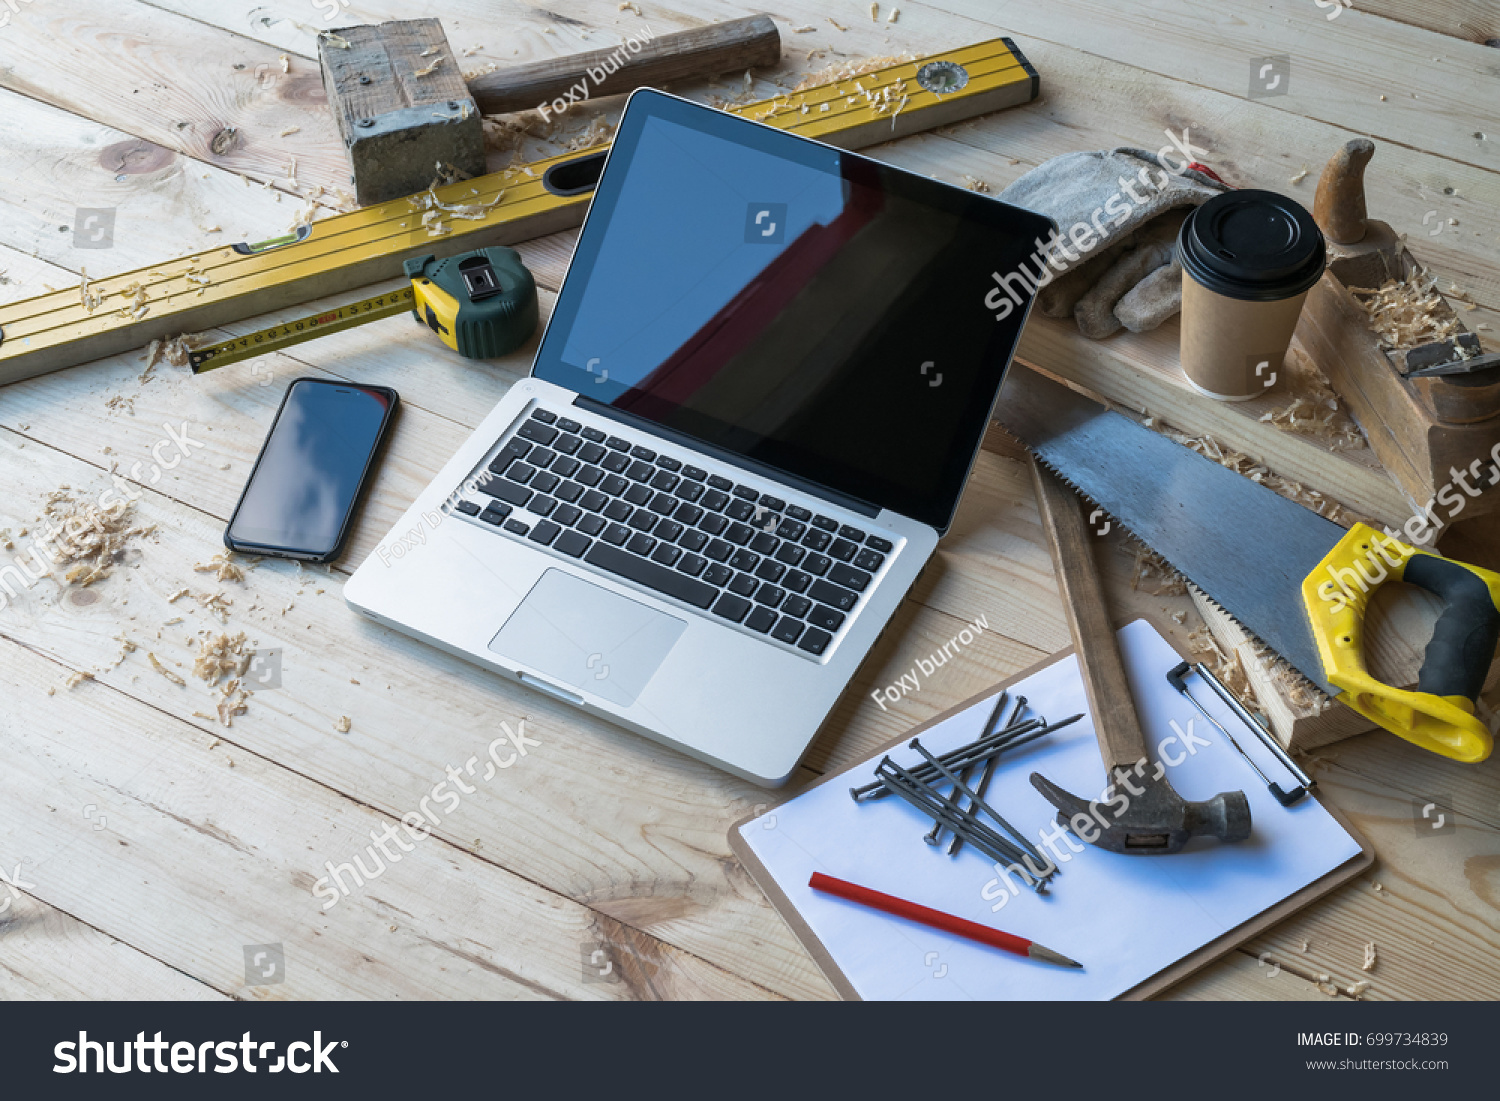 Close up laptop on wooden planks, smartphone, clipboard, pen, nails, hammer, plane, saw, tape measure, level, gloves, glasses, cup of coffee, sawdust. Carpentry. Mock up. Construction business. #699734839